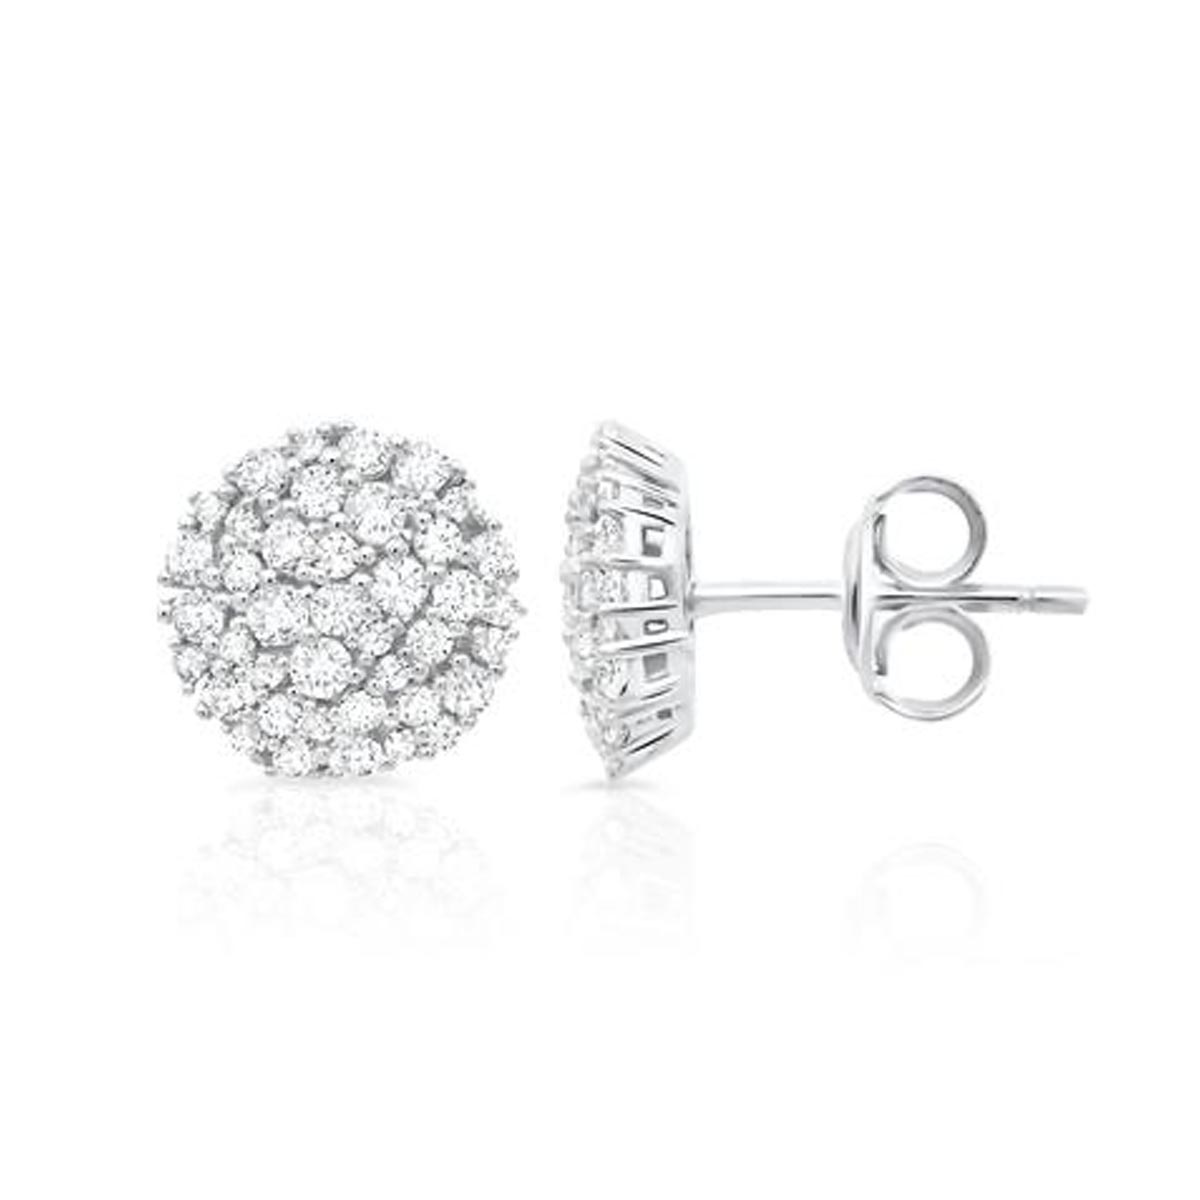 Crislu Cubic Zirconia Stud Earrings in Sterling Silver with Platinum Finish